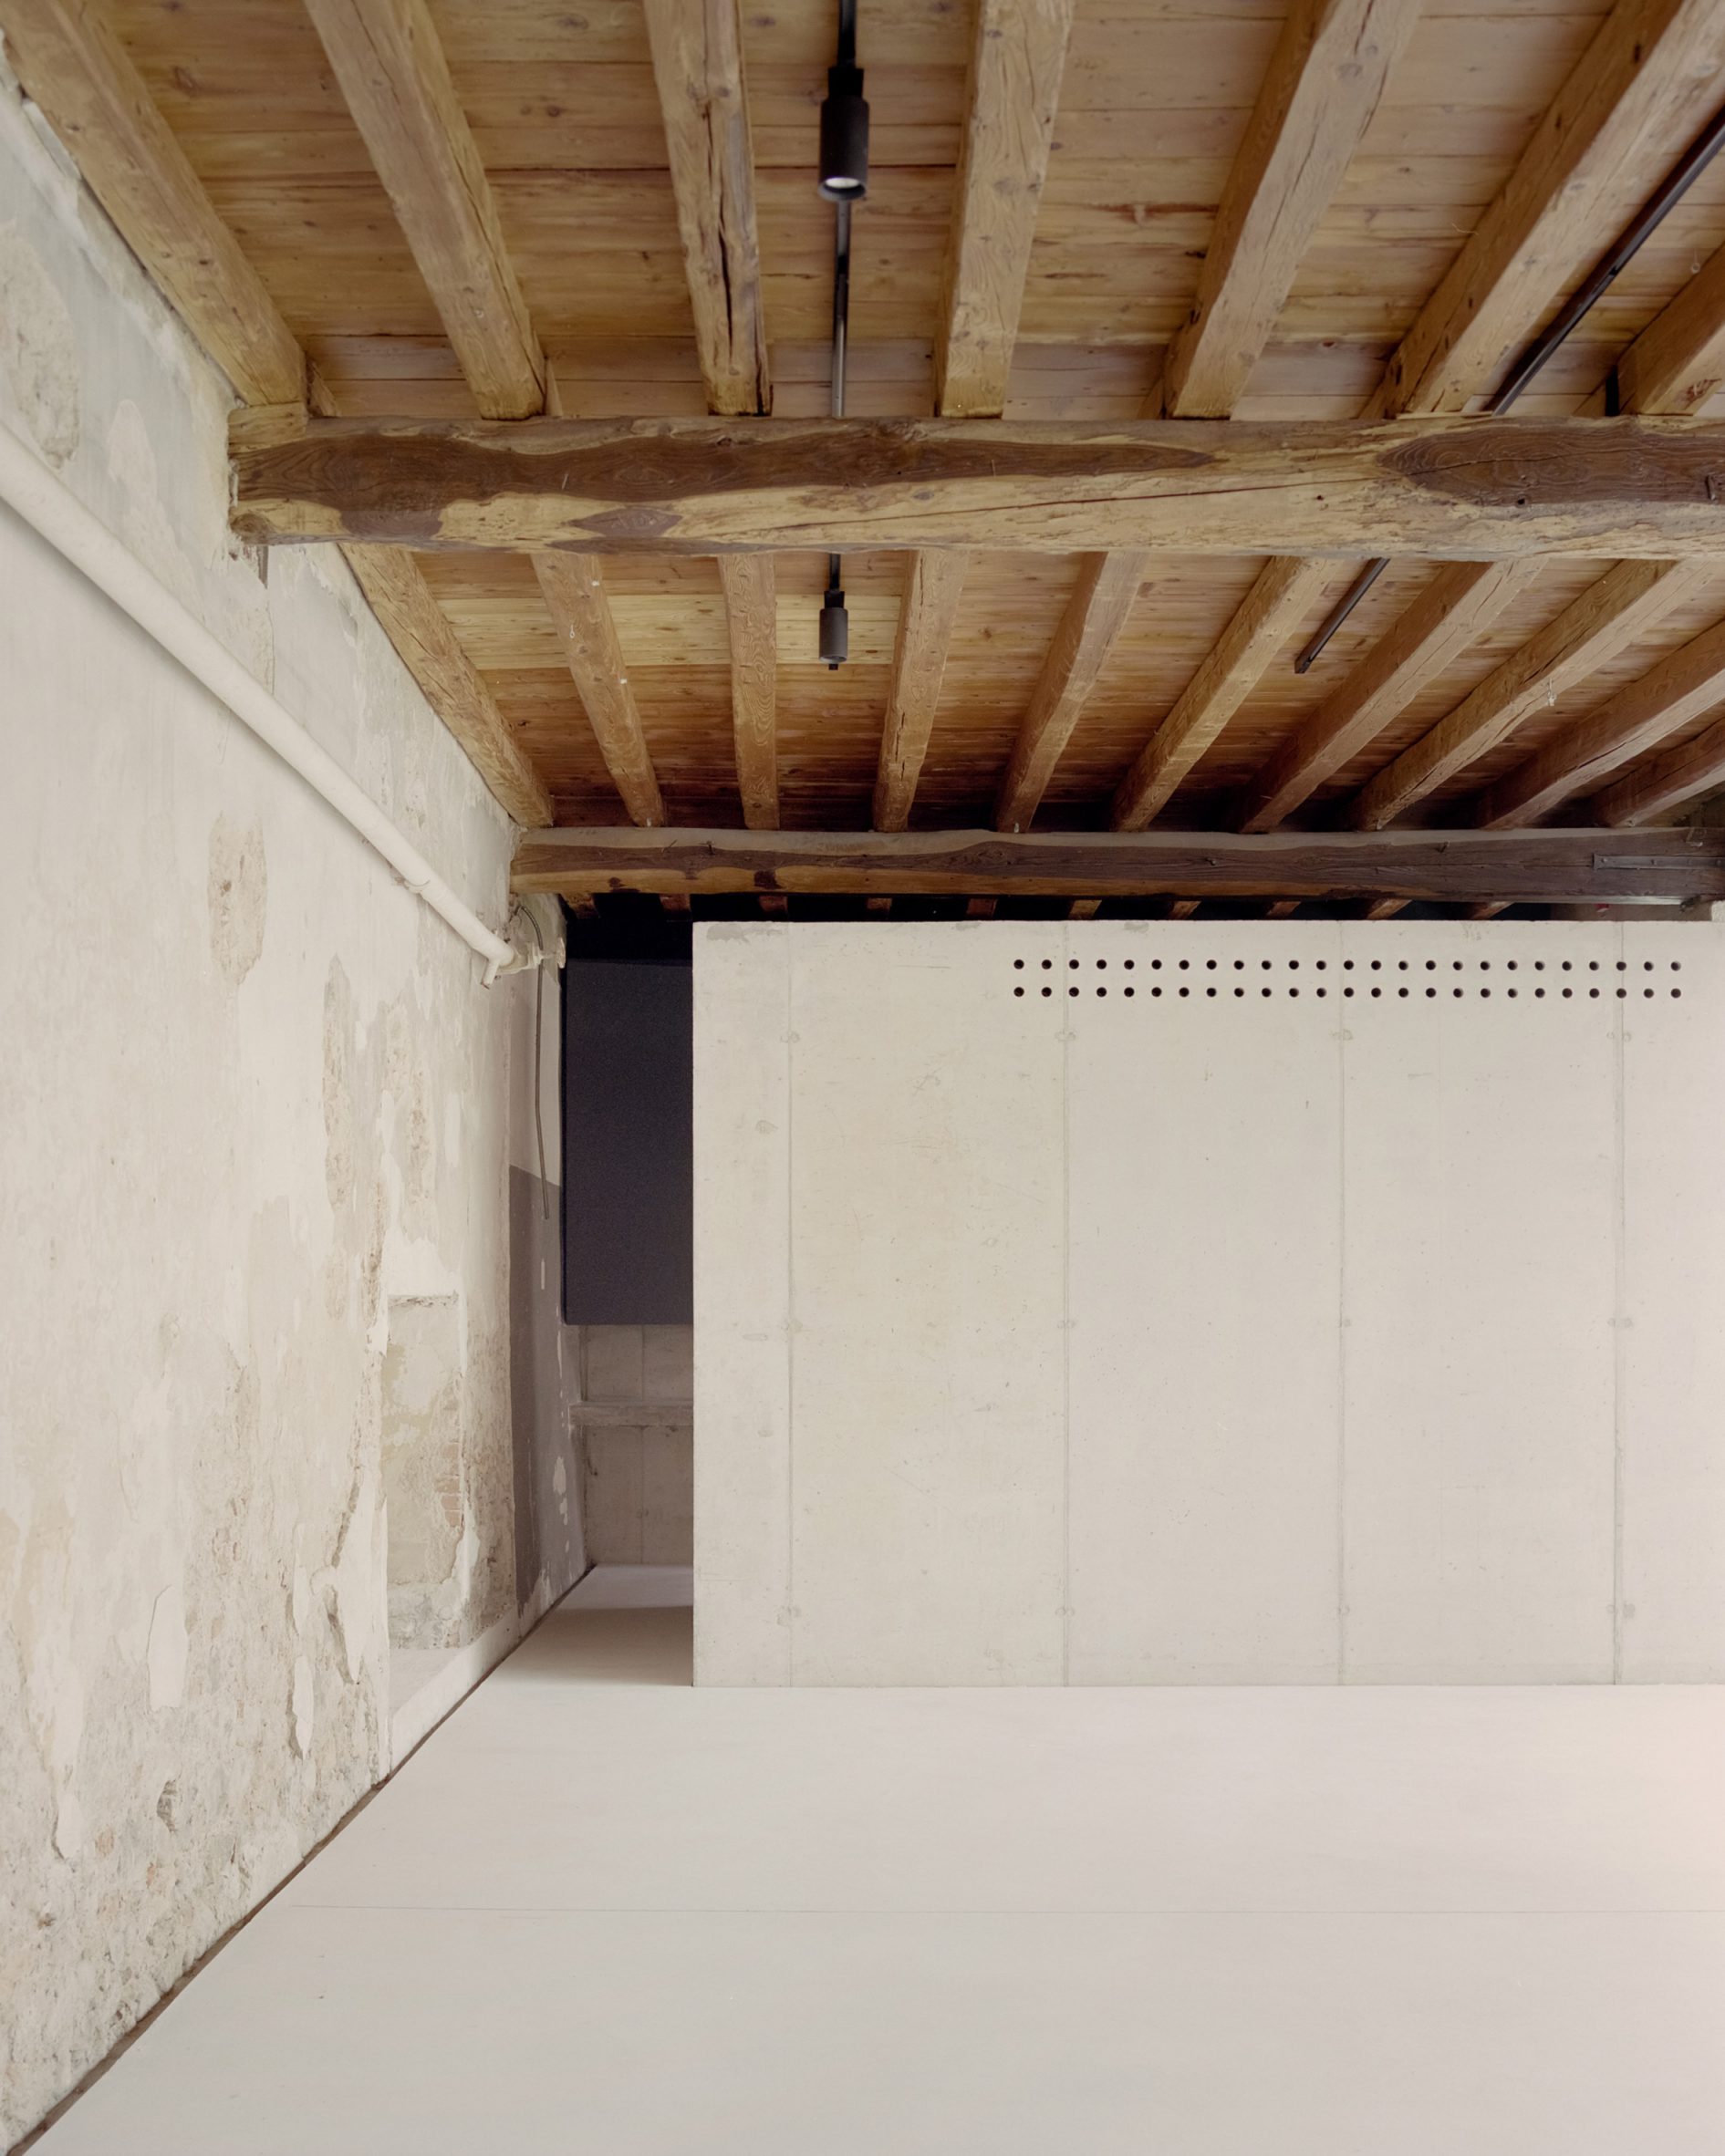 Art gallery with exposed concrete walls and timber ceiling